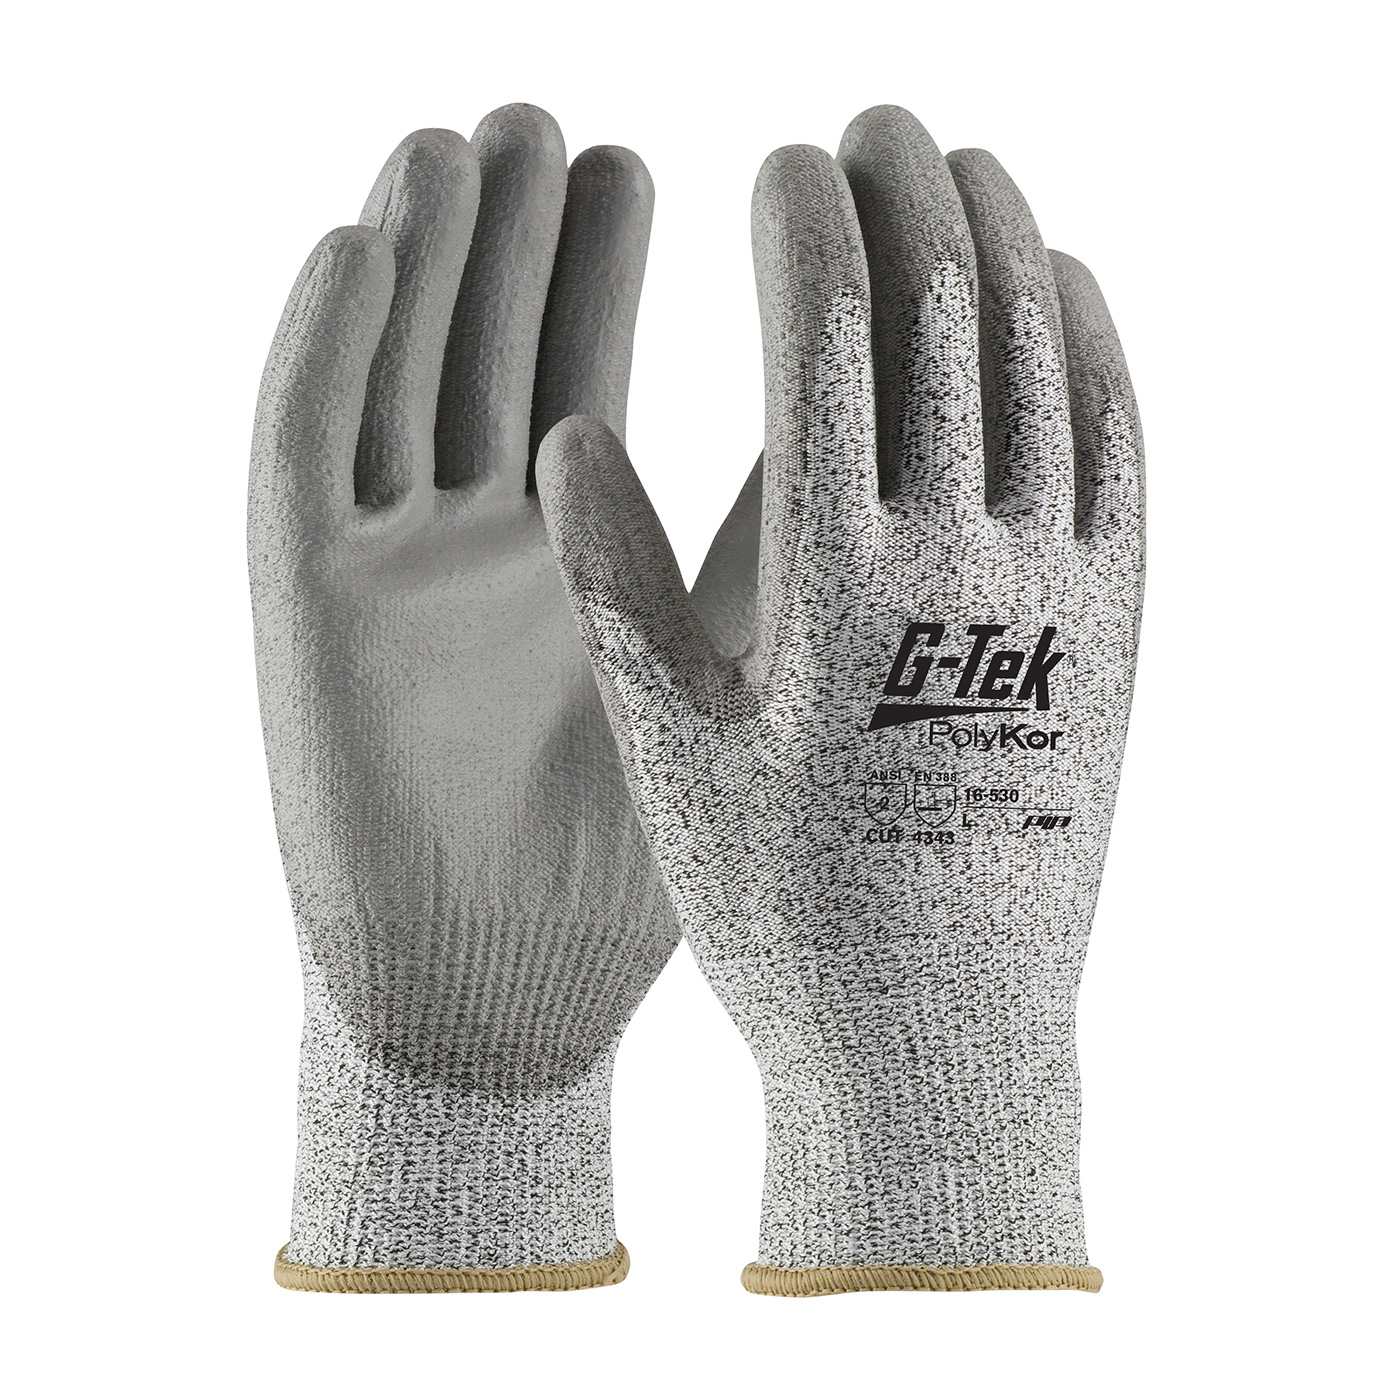 PIP 16-530/L G-Tek PolyKor Seamless Knit PolyKor Blended Glove with Polyurethane Coated Smooth Grip on Palm & Fingers - Large PID-16 530 L